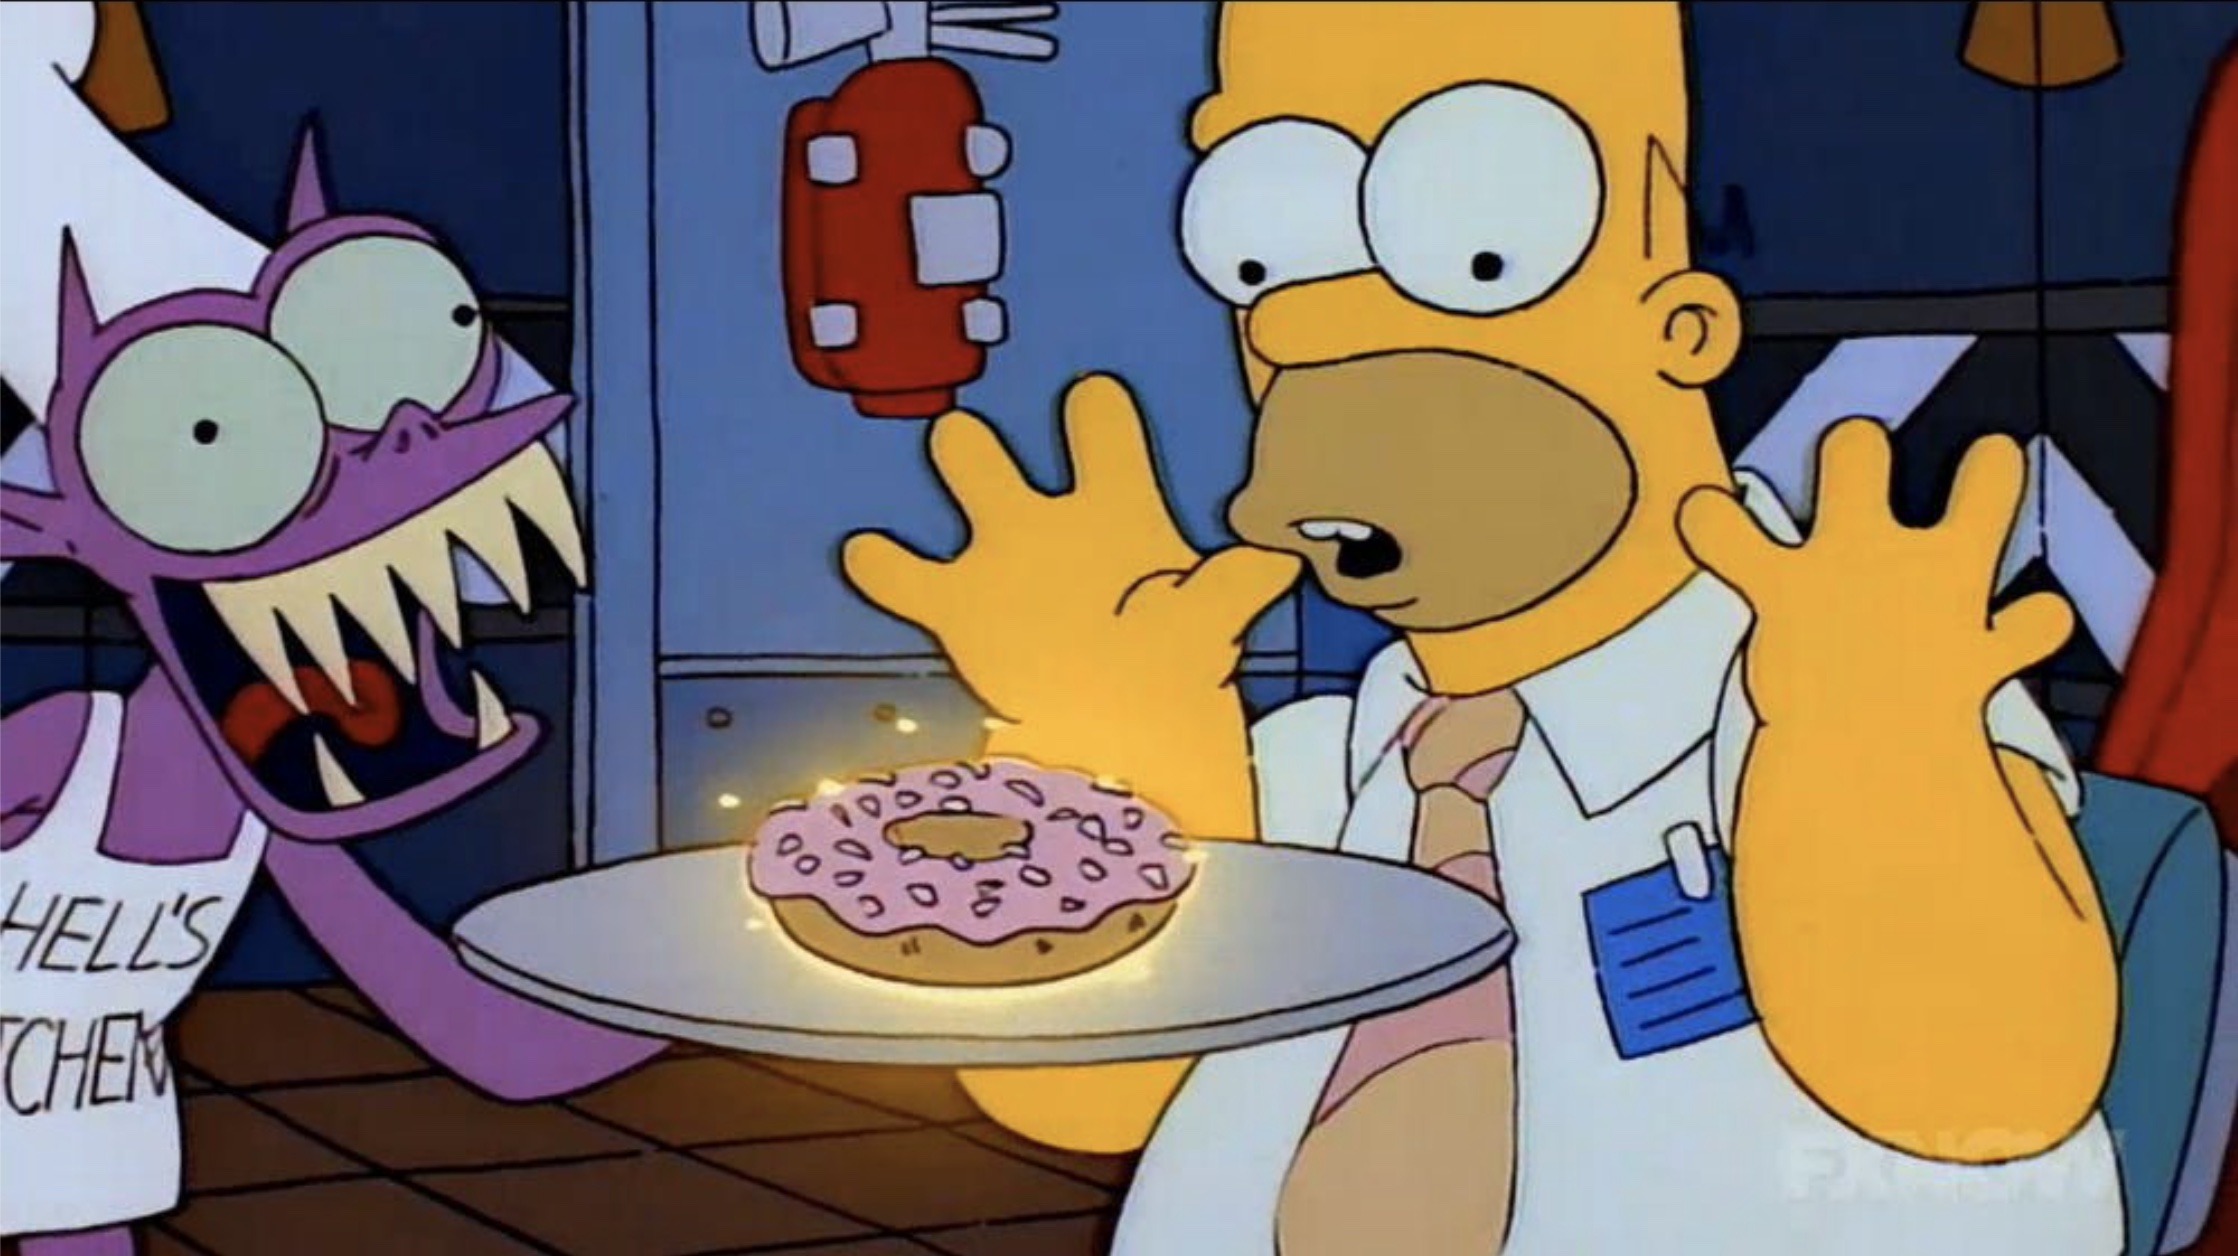 Mmmm Donuts The Simpsons With Dubco Strawberry Frosted Donut Milkshake Ipa Beer Flicks